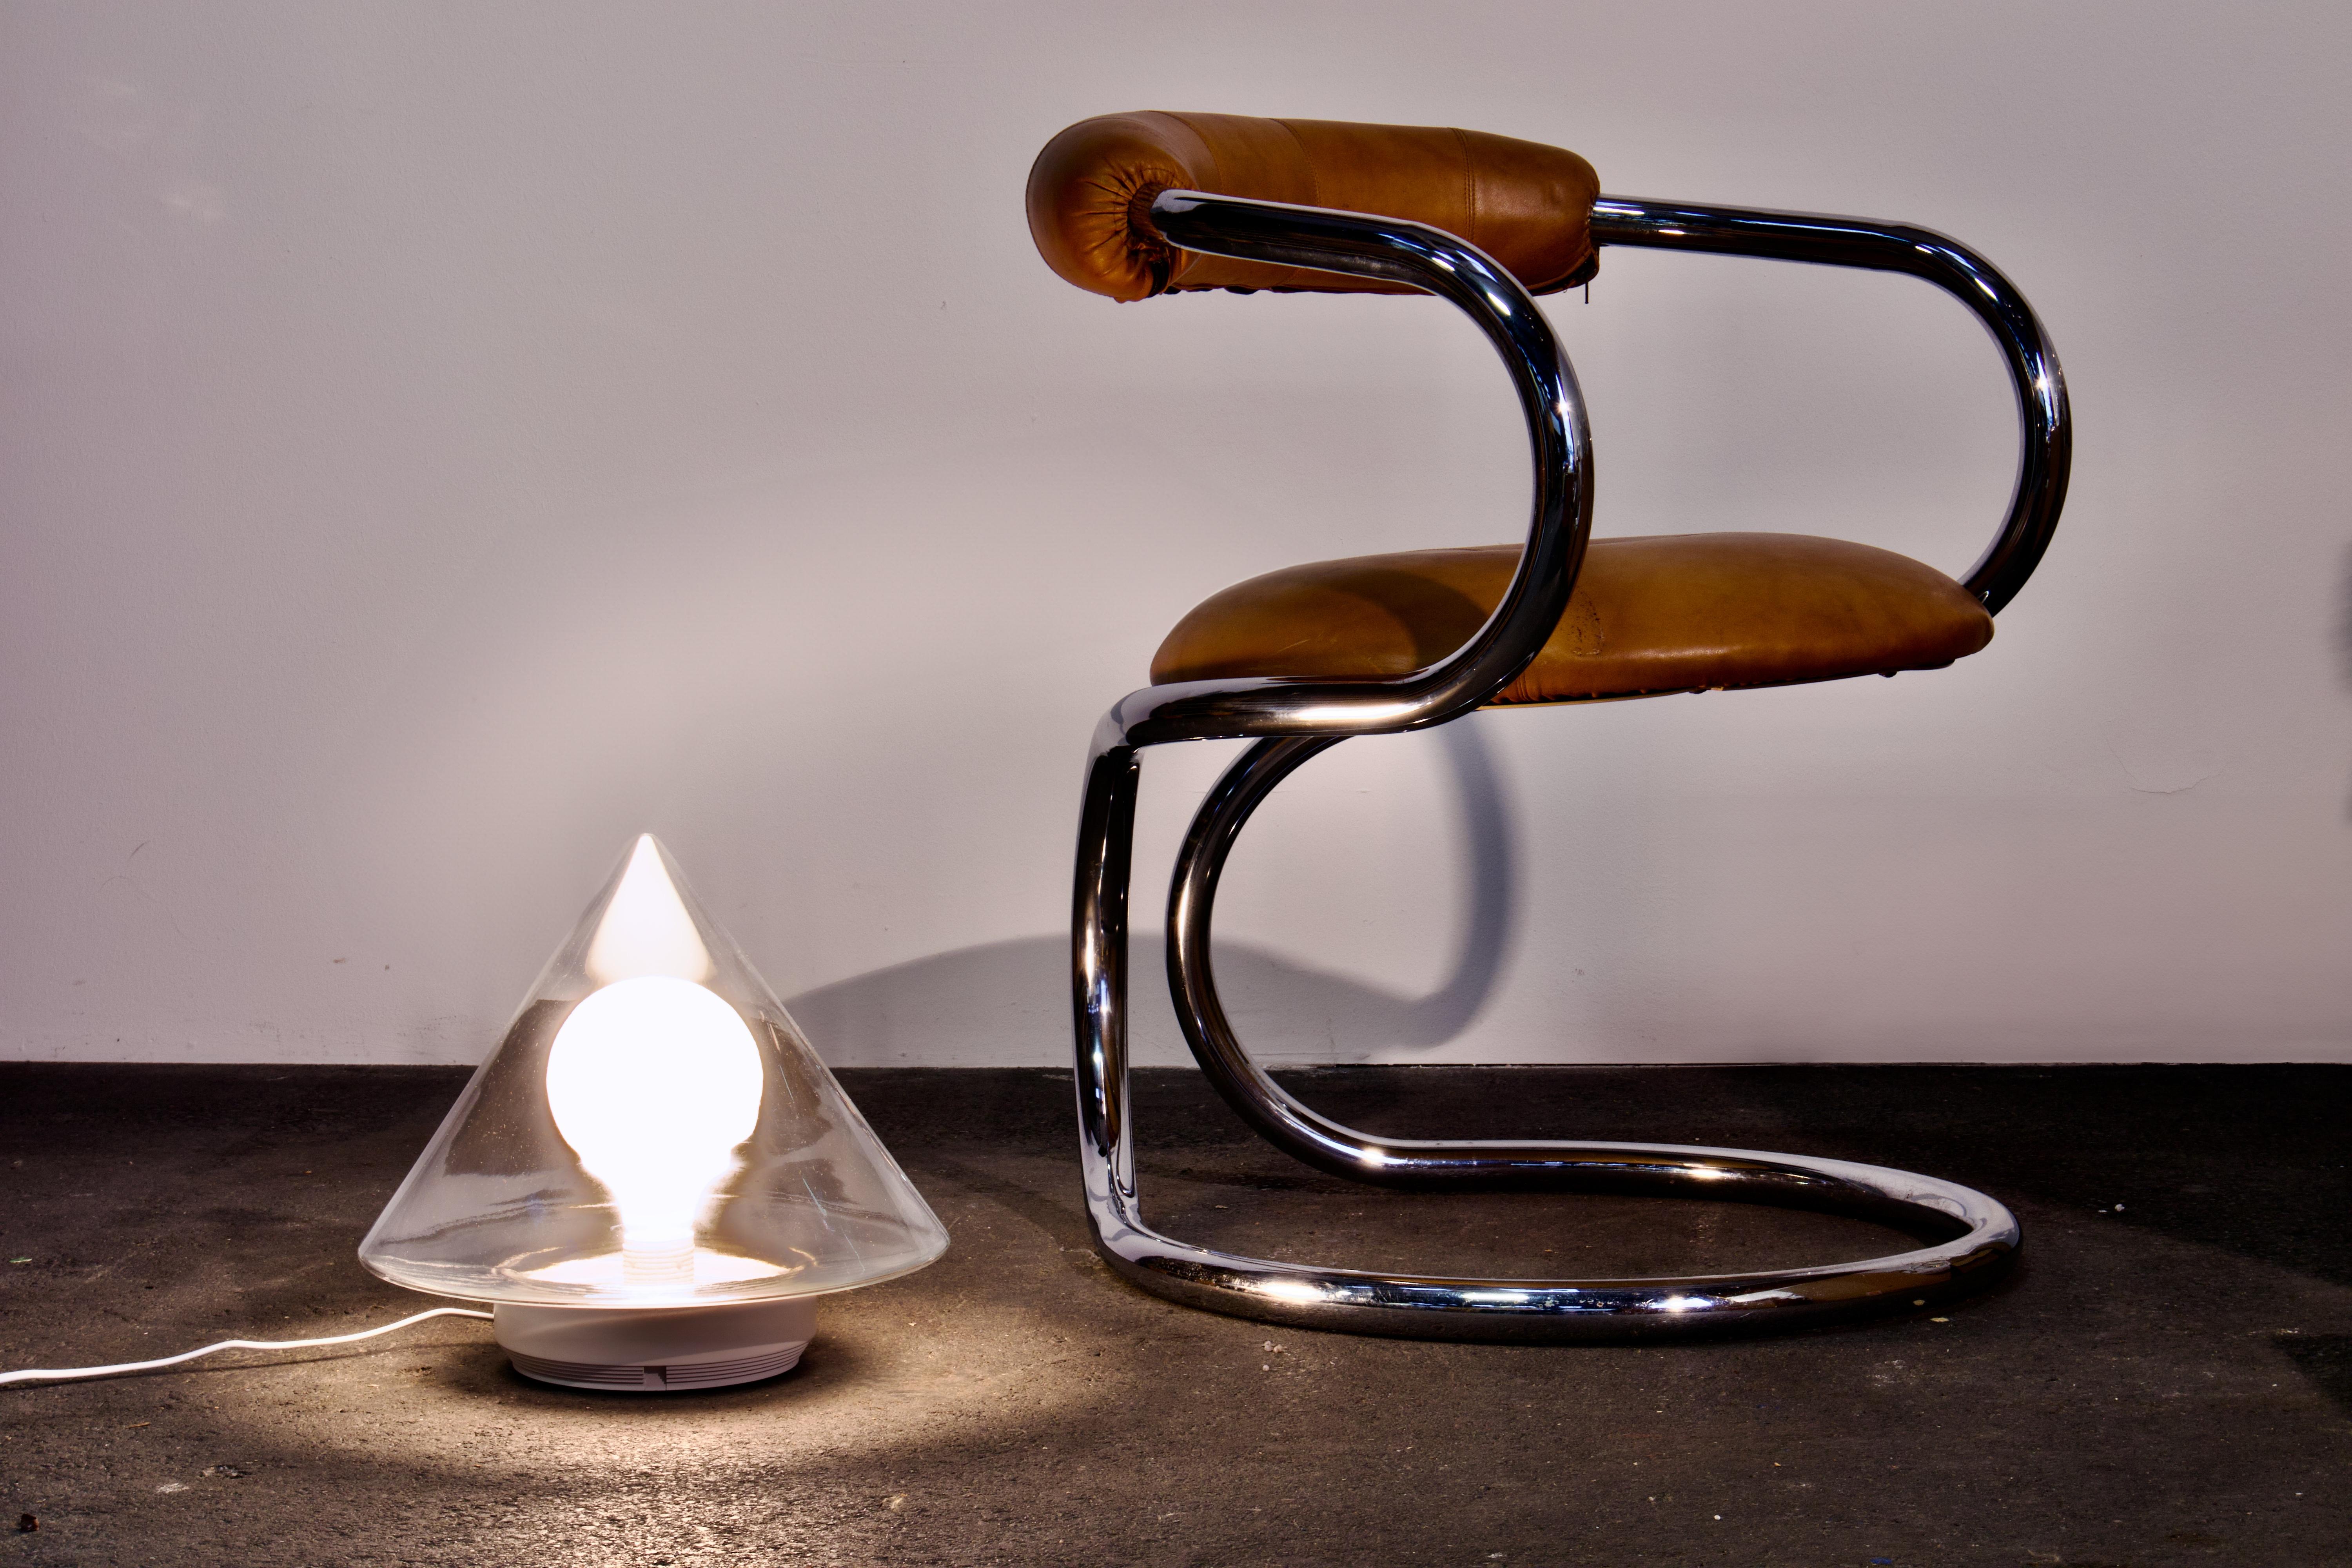 Extraordinary and beautiful, This Mid-Century Modern German art glass floor lamp was designed by Hartmut Engel in 1979 and made in Berlin (West Germany) by Brendel & Loewig.

The photos show the lamp with a novelty oversize bulb, however, it will